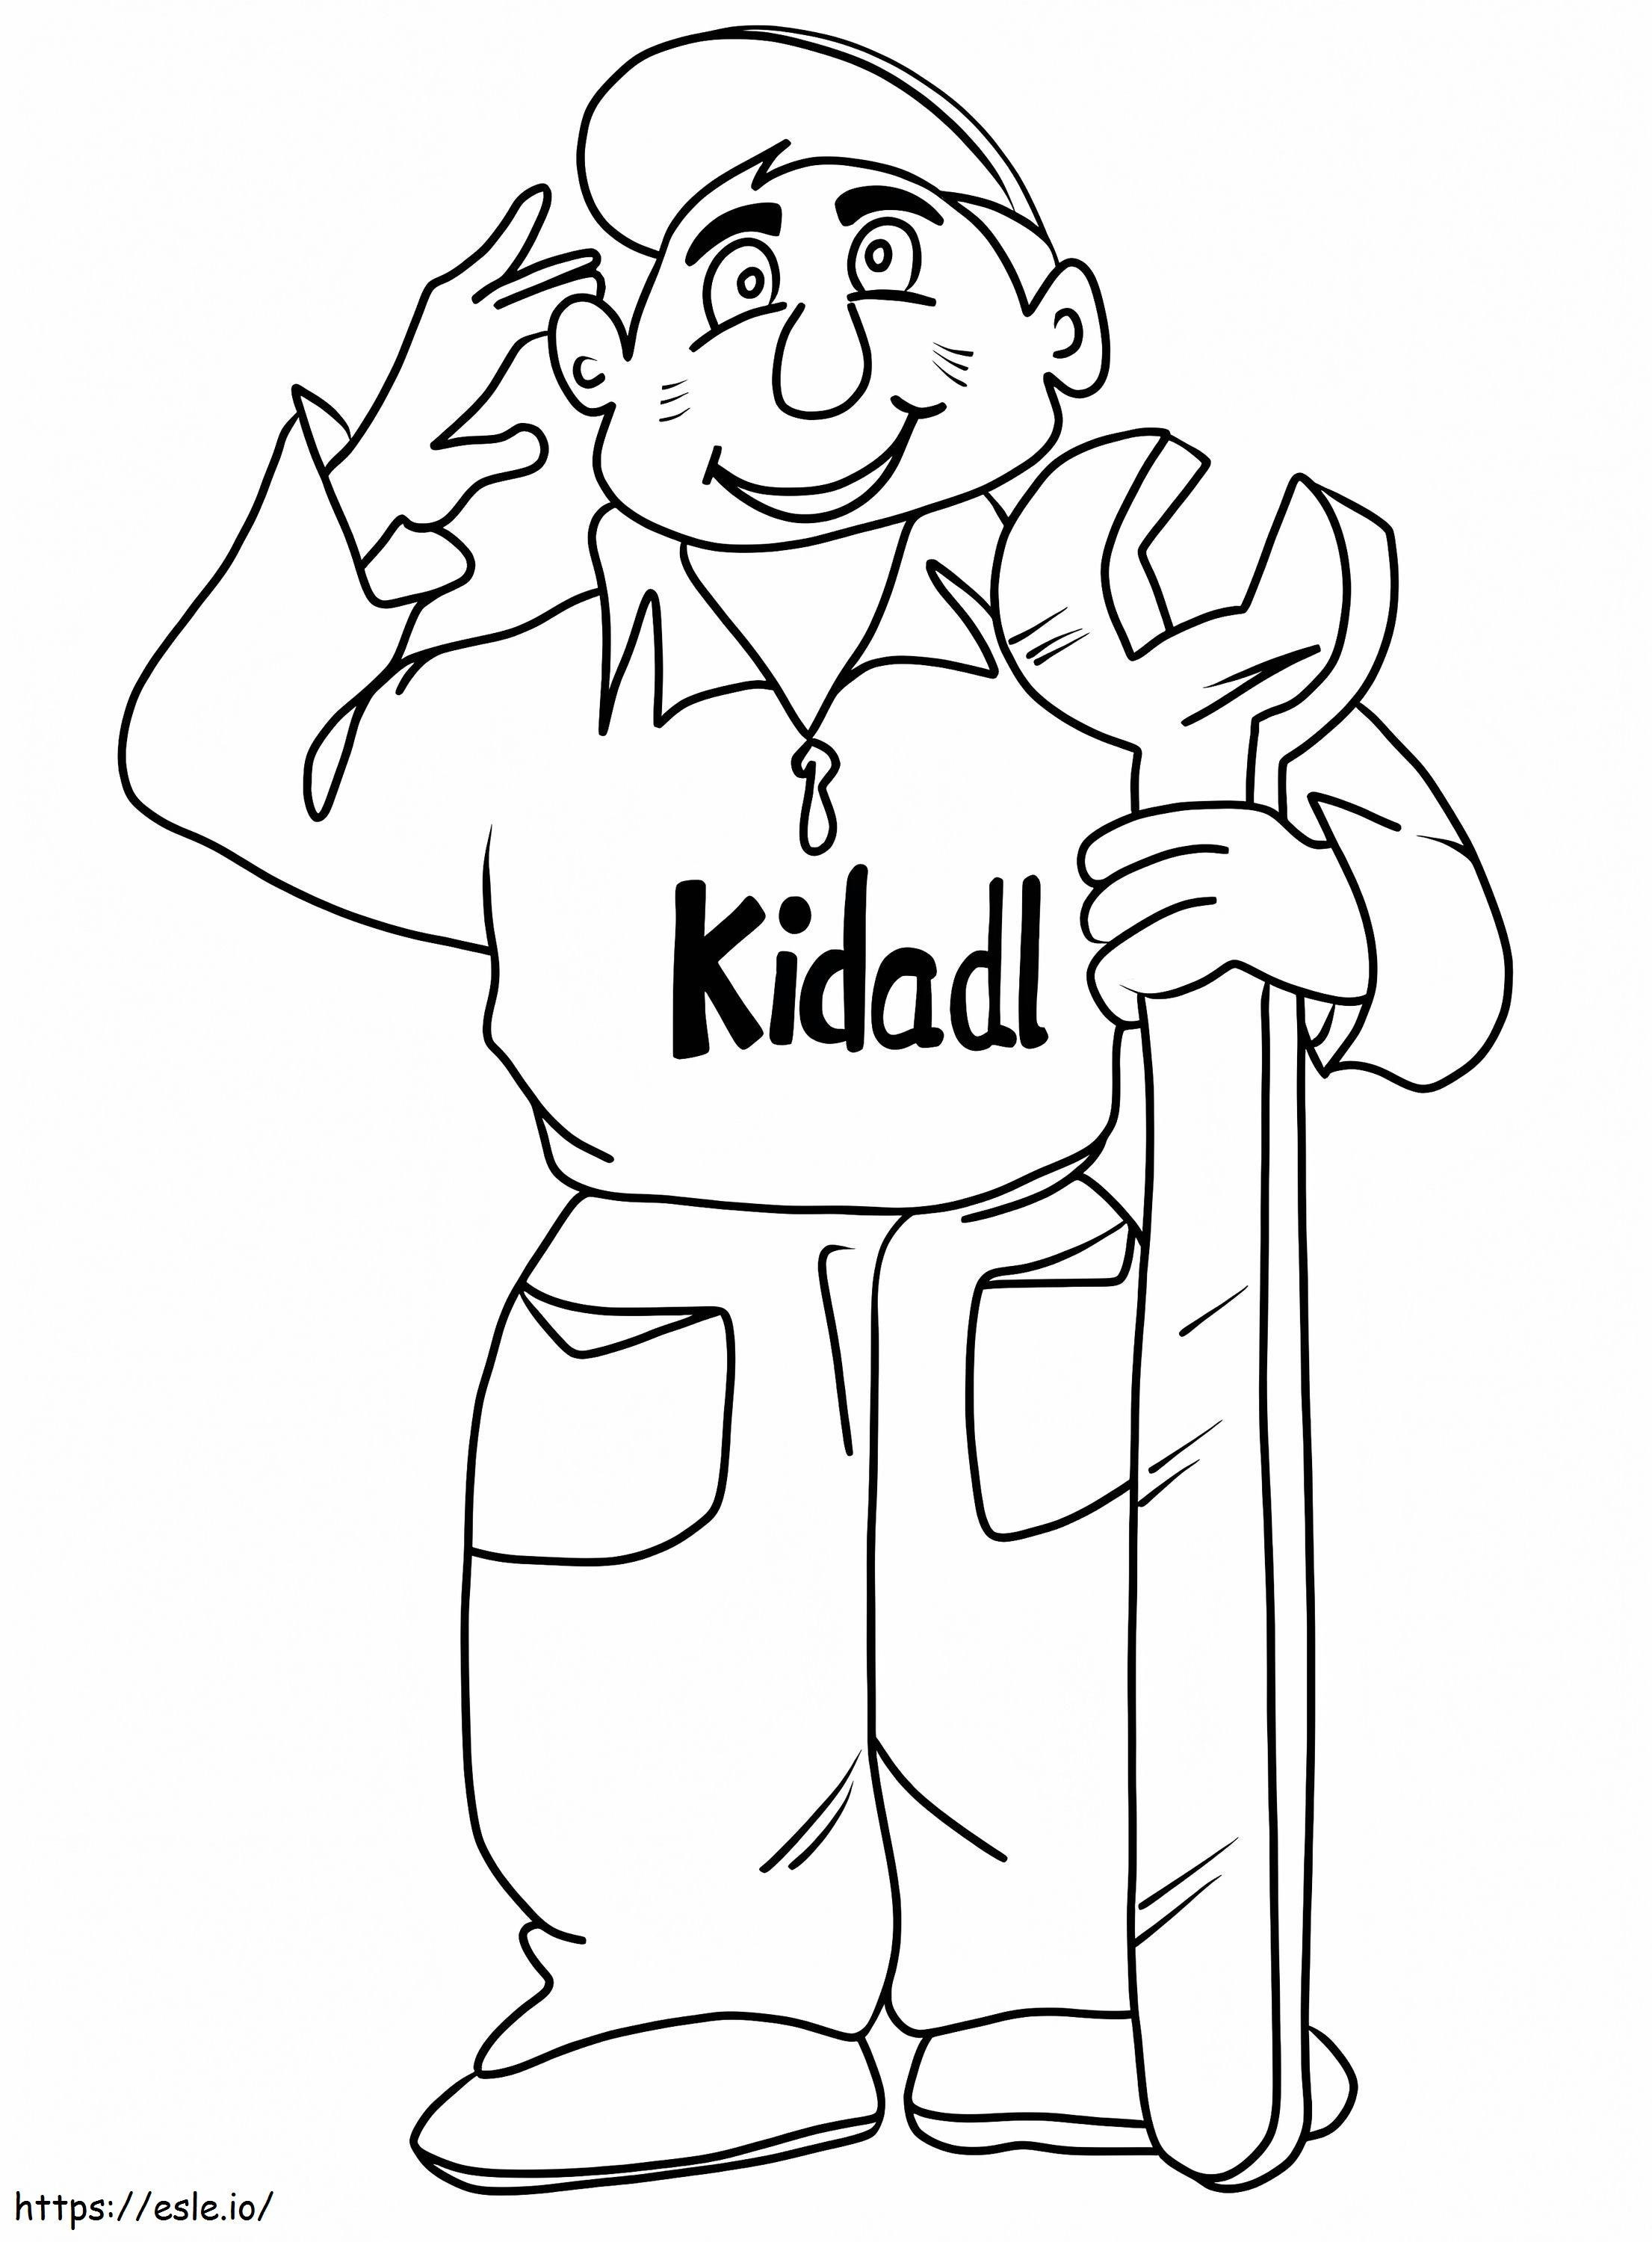 Mechanic 1 coloring page